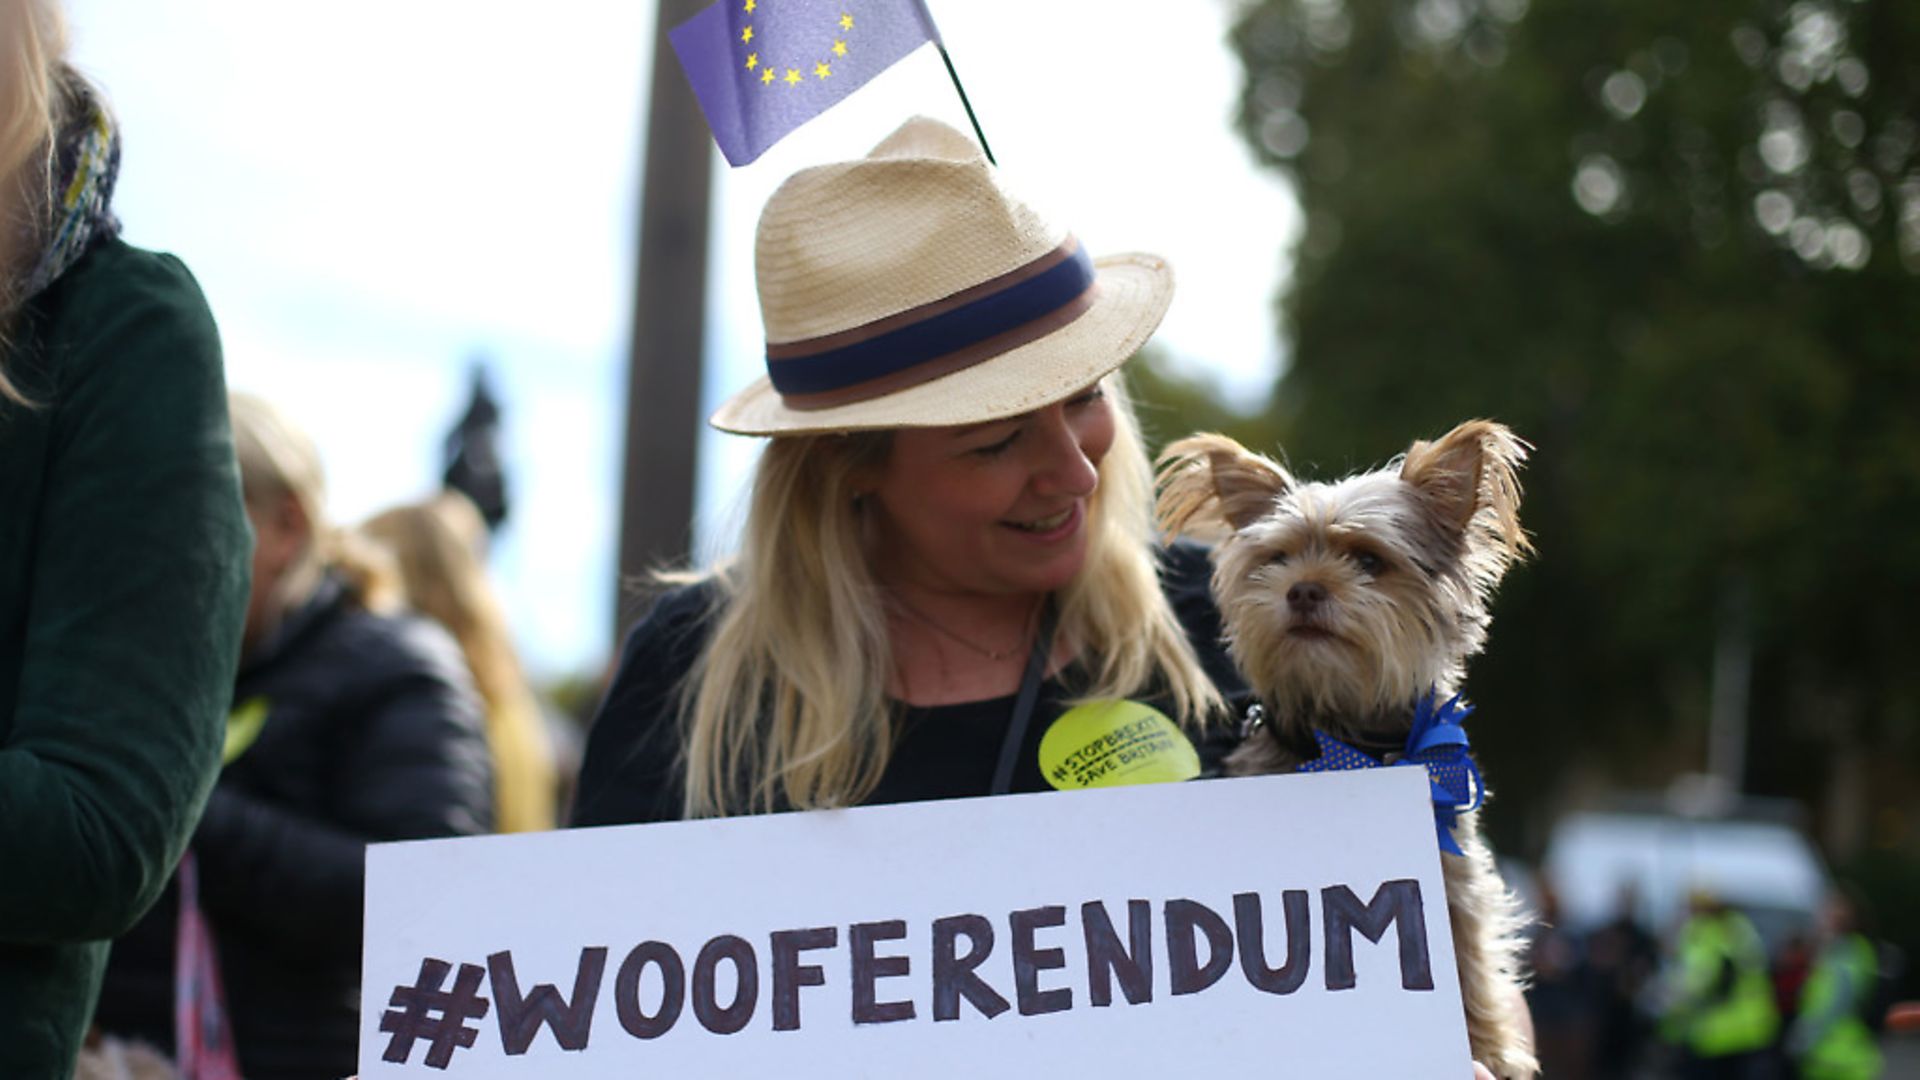 Photographs from the 'Wooferendum march' in central London where dog owners and their pets gather to demand a People's Vote. Photograph: Yui Mok/PA Wire. - Credit: PA